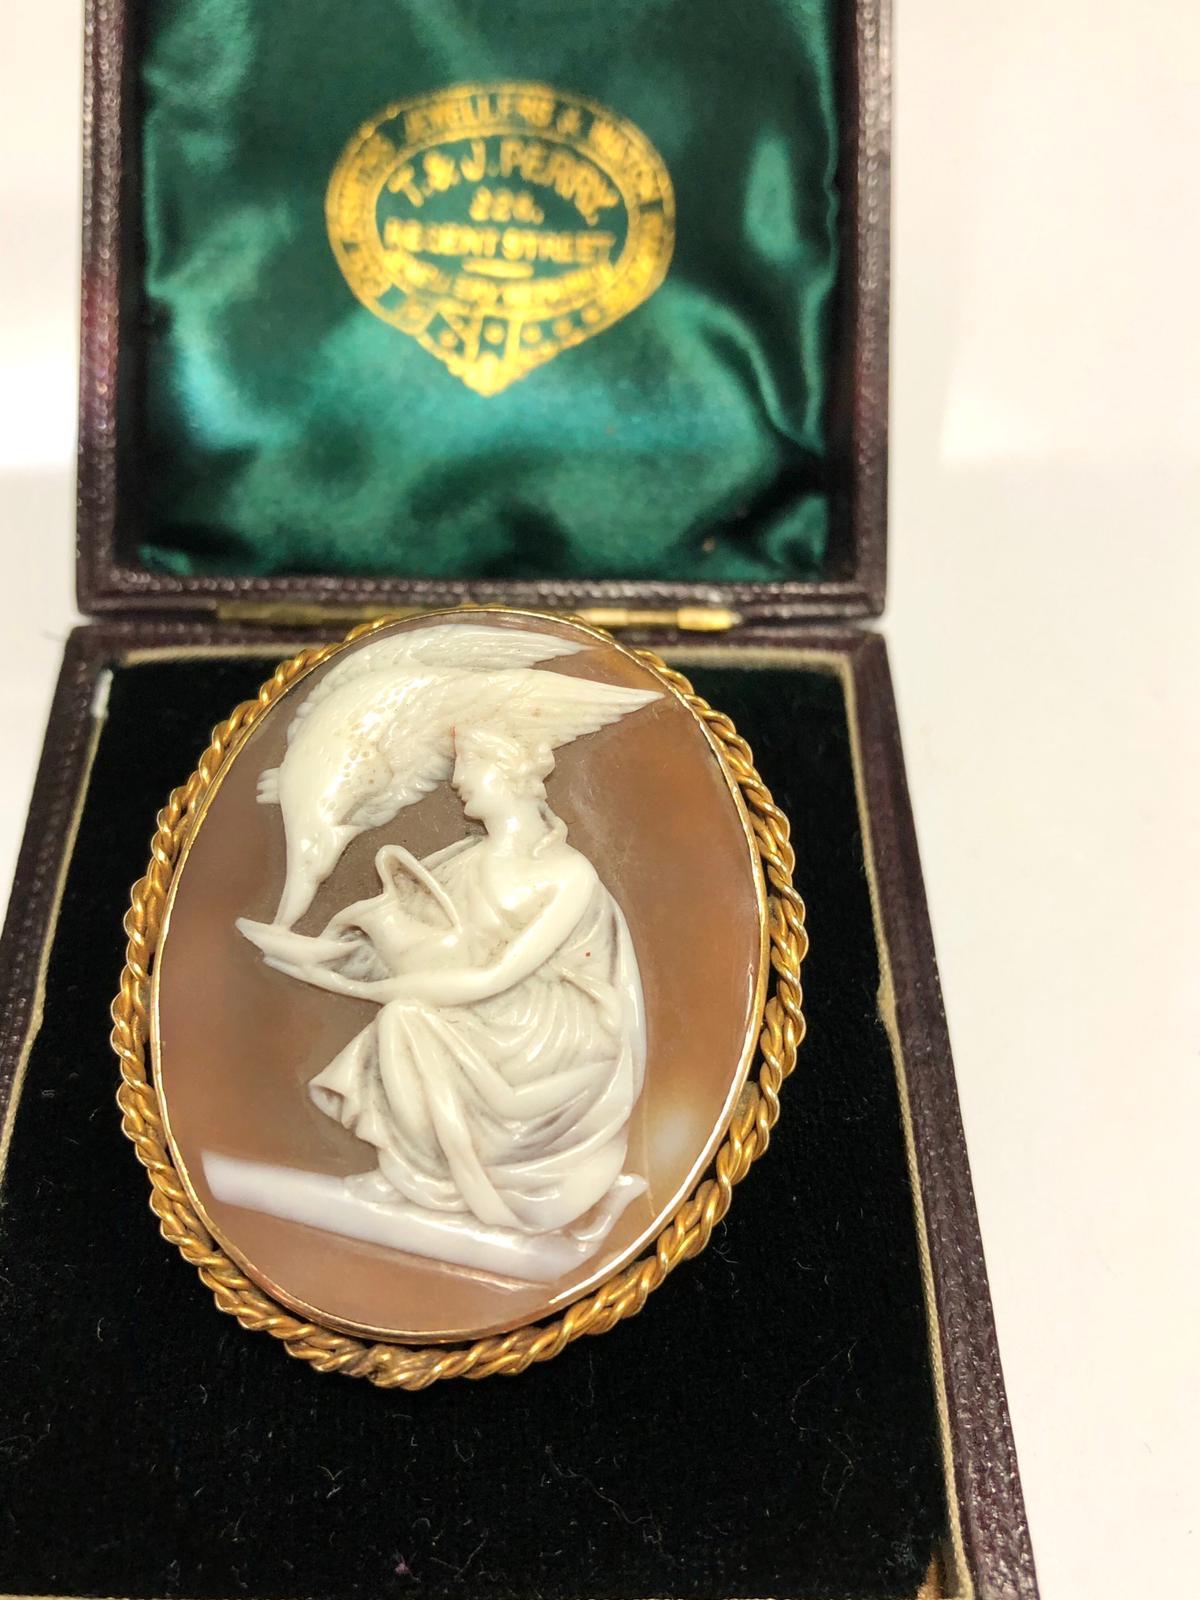 Cameo on the shell, gold mount, 18kt mid 19th century
Size : 4cm x 3,5cm
Weight : 11,4gr.
Hebe, a young maiden, server nectar to her father, Zeus (in the guise of an eagle)

